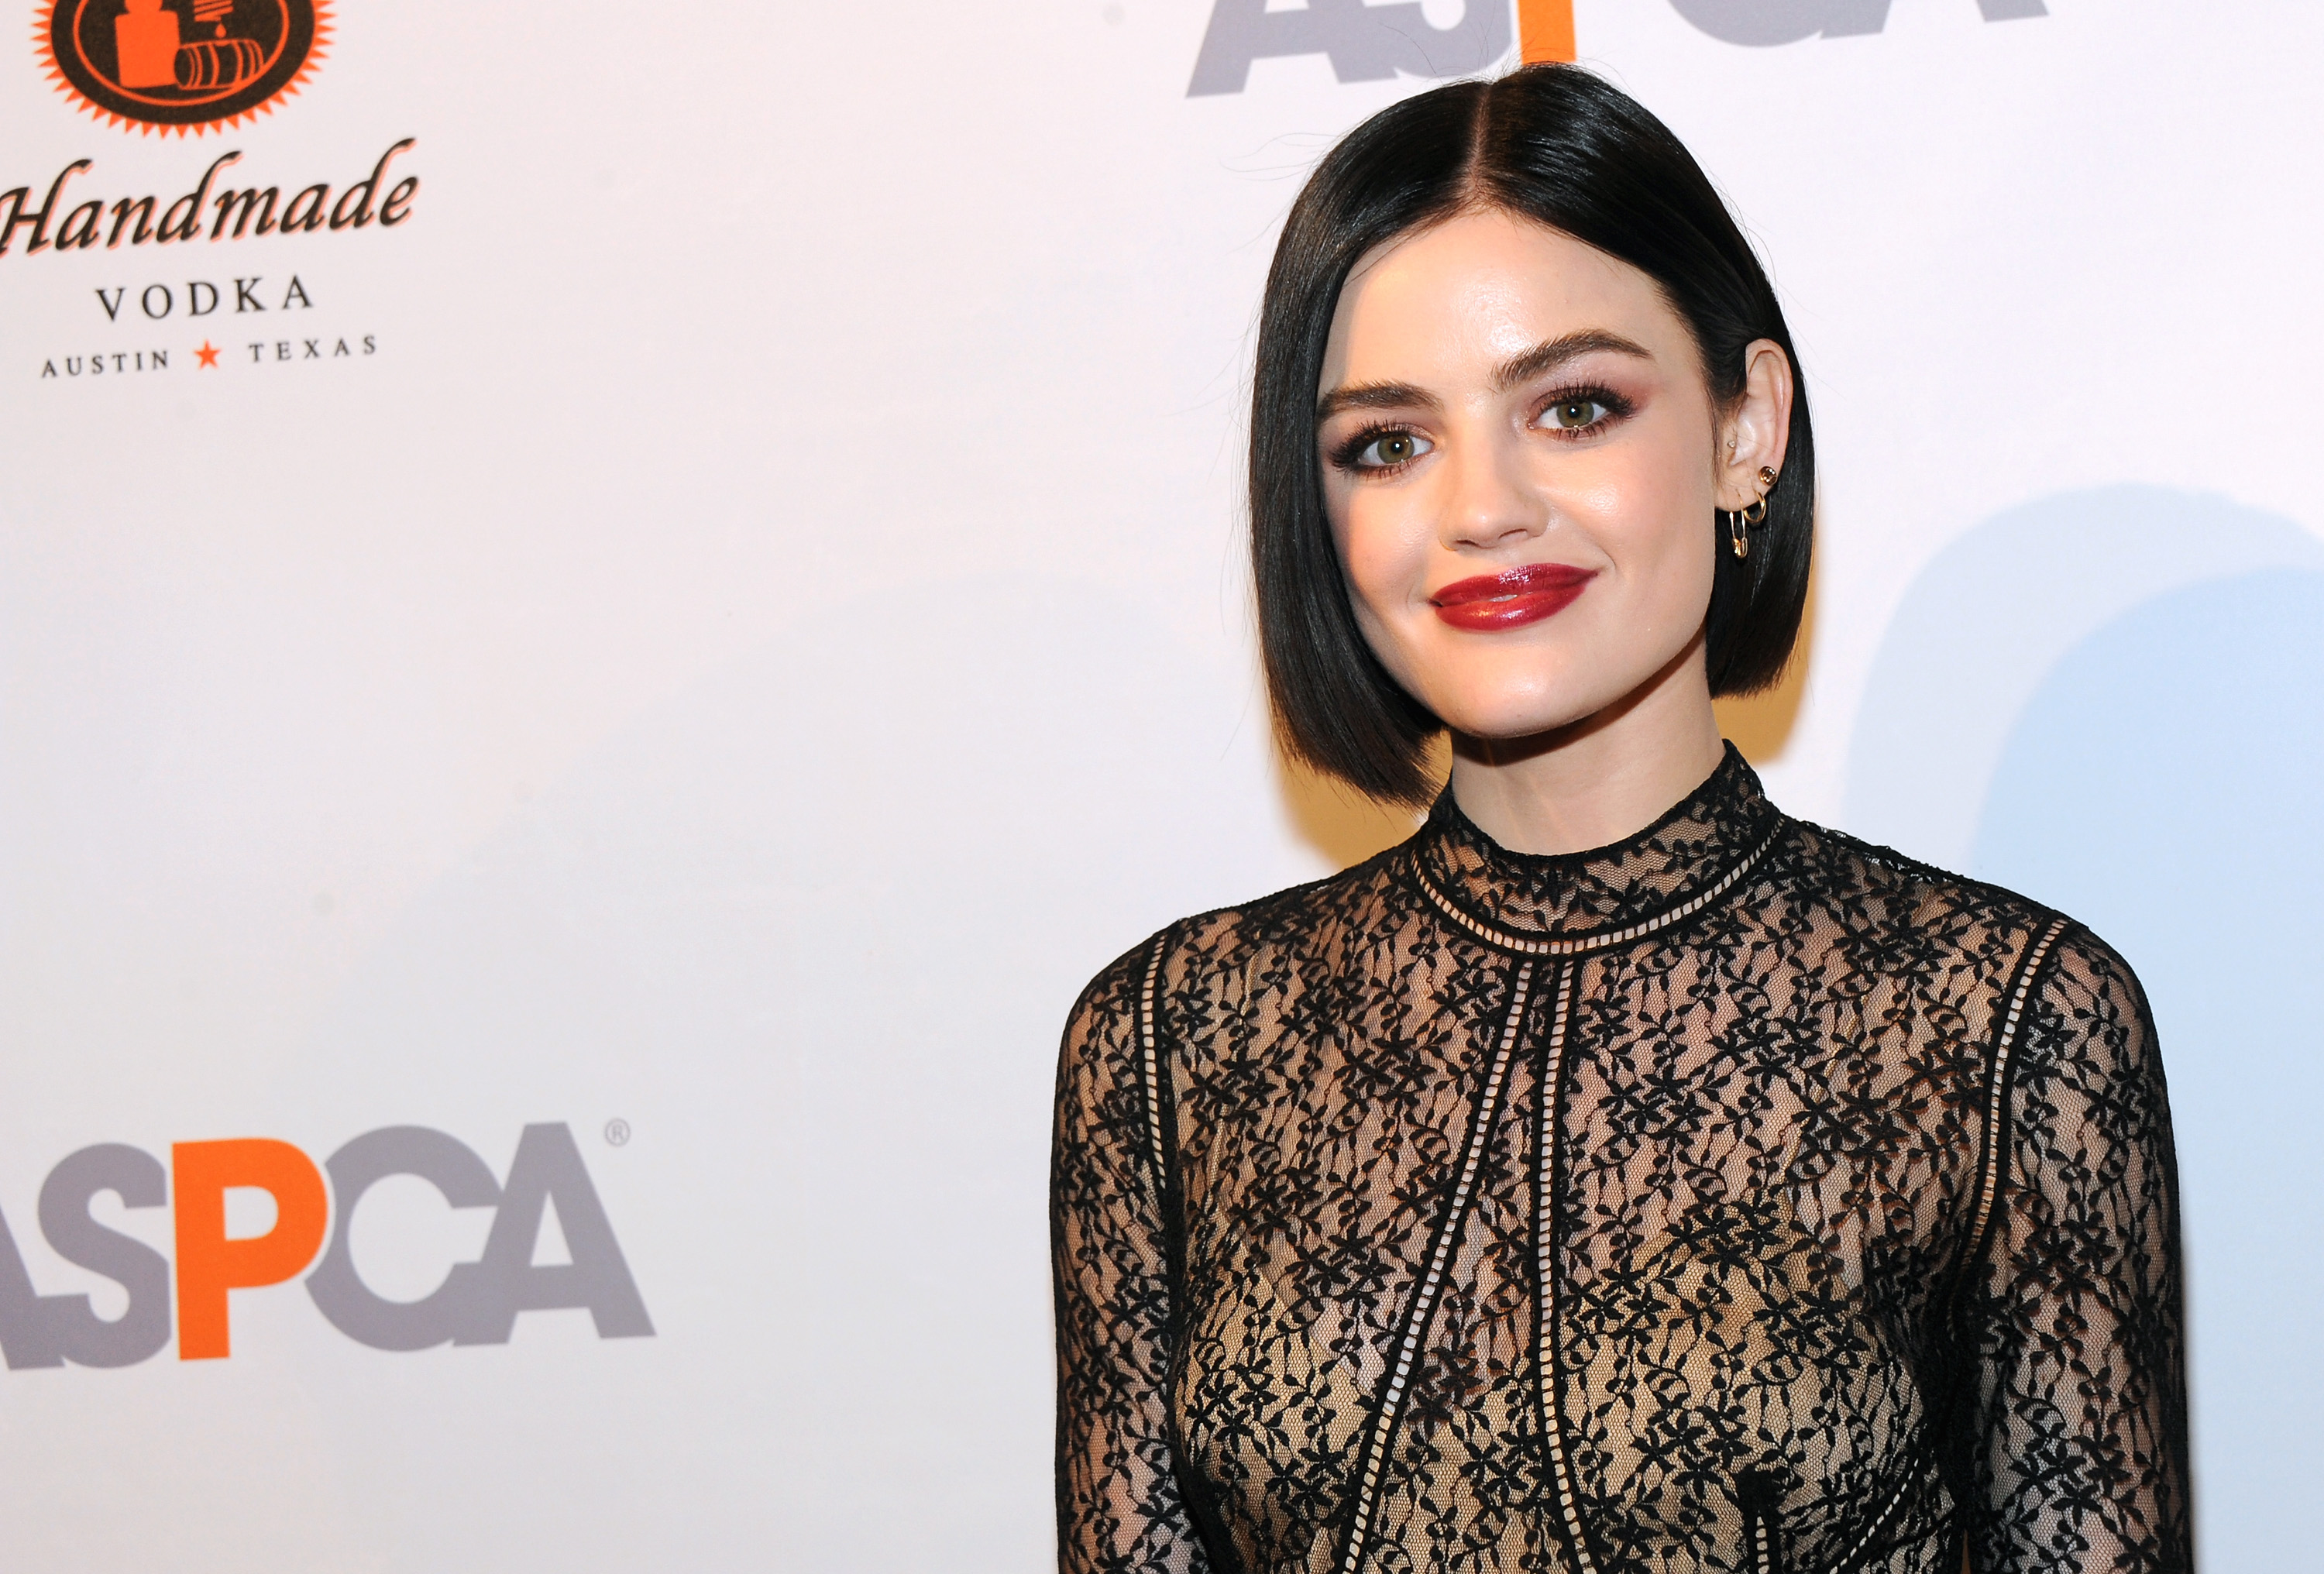 NEW YORK, NY - APRIL 20:  Lucy Hale attends ASPCA After Dark cocktail party at The Plaza Hotel on April 20, 2017 in New York City.  (Photo by Desiree Navarro/WireImage) (Desiree Navarro—WireImage)